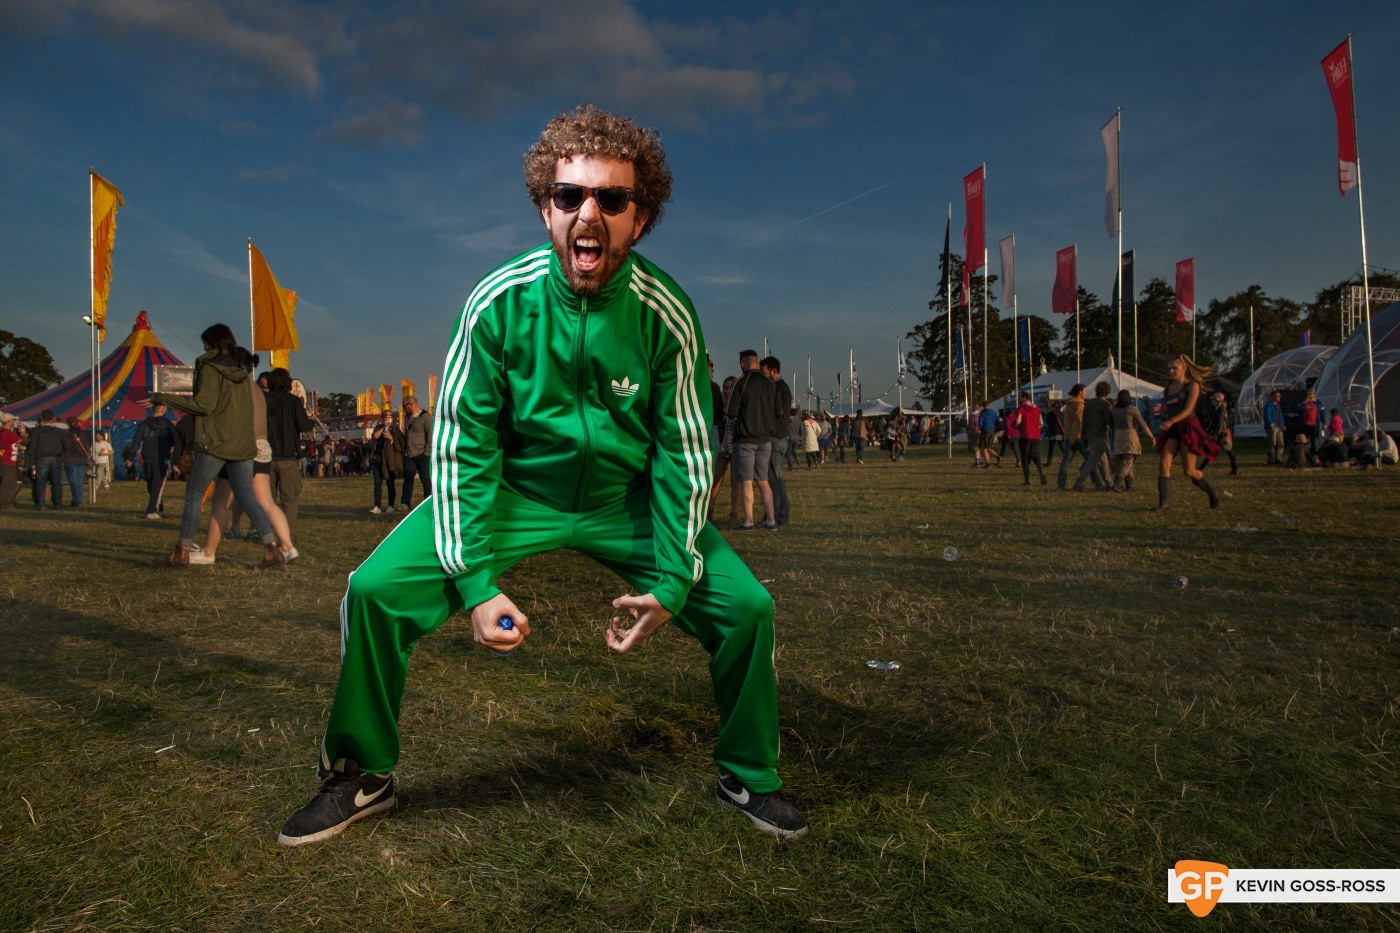 Humans of Electric Picnic - 2015 - IMG_6663